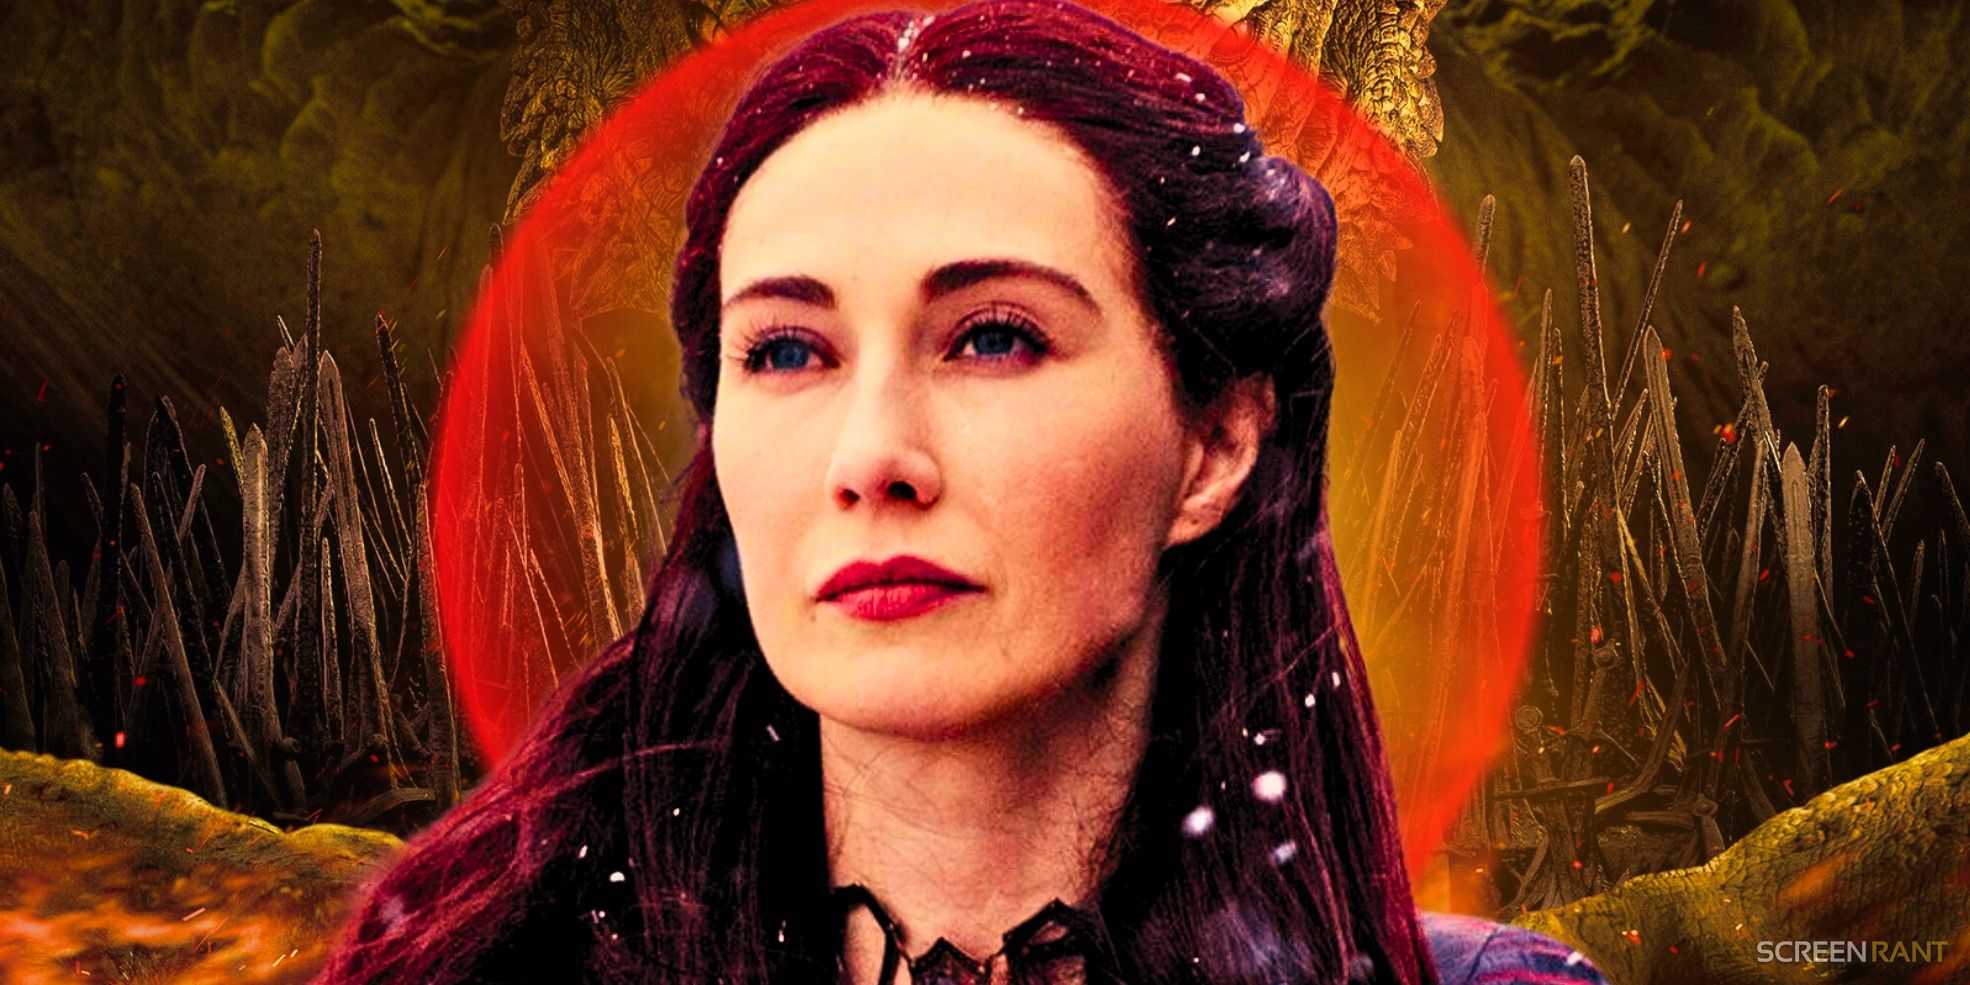 Carice van Houten as Melisandre in Game of Thrones, with House of the Dragon poster of dragon and swords behind her